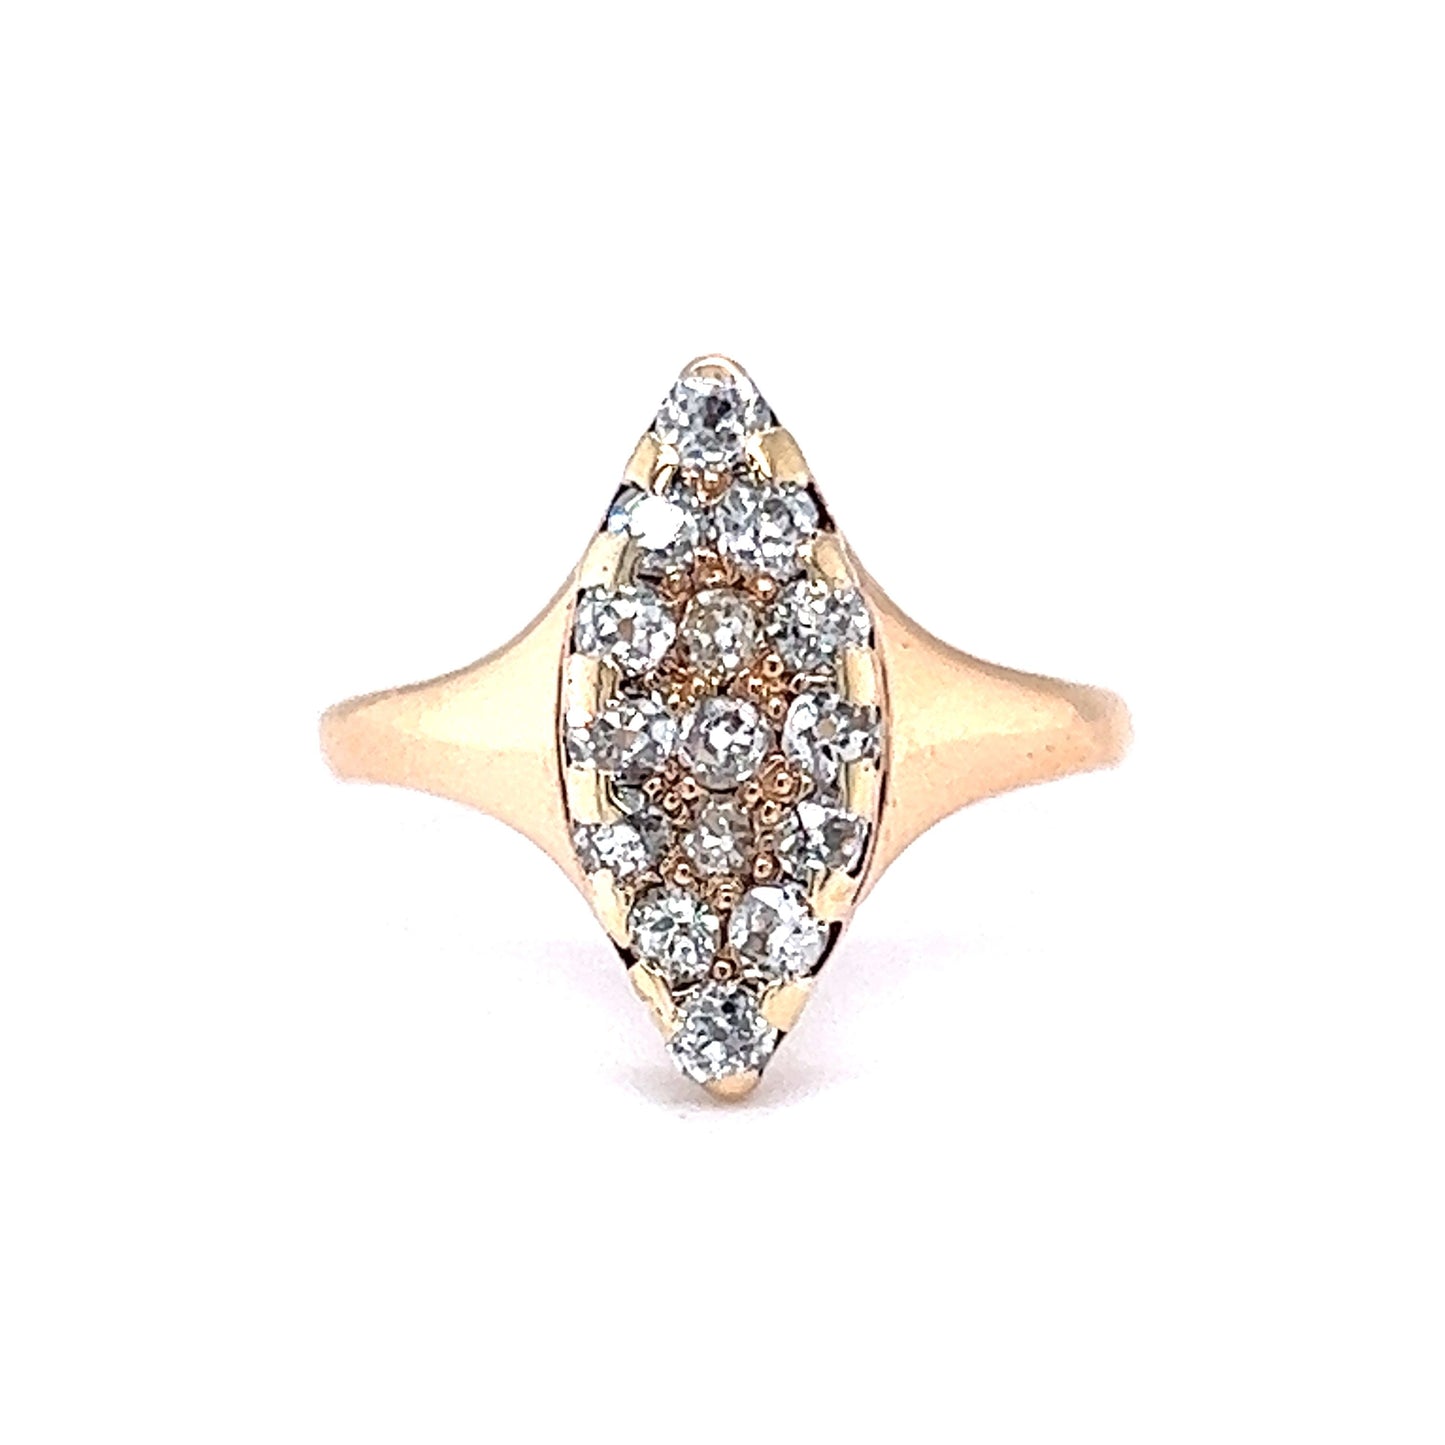 Victorian Cocktail Ring .45 Old European Cut Diamonds in 14k Yellow Gold